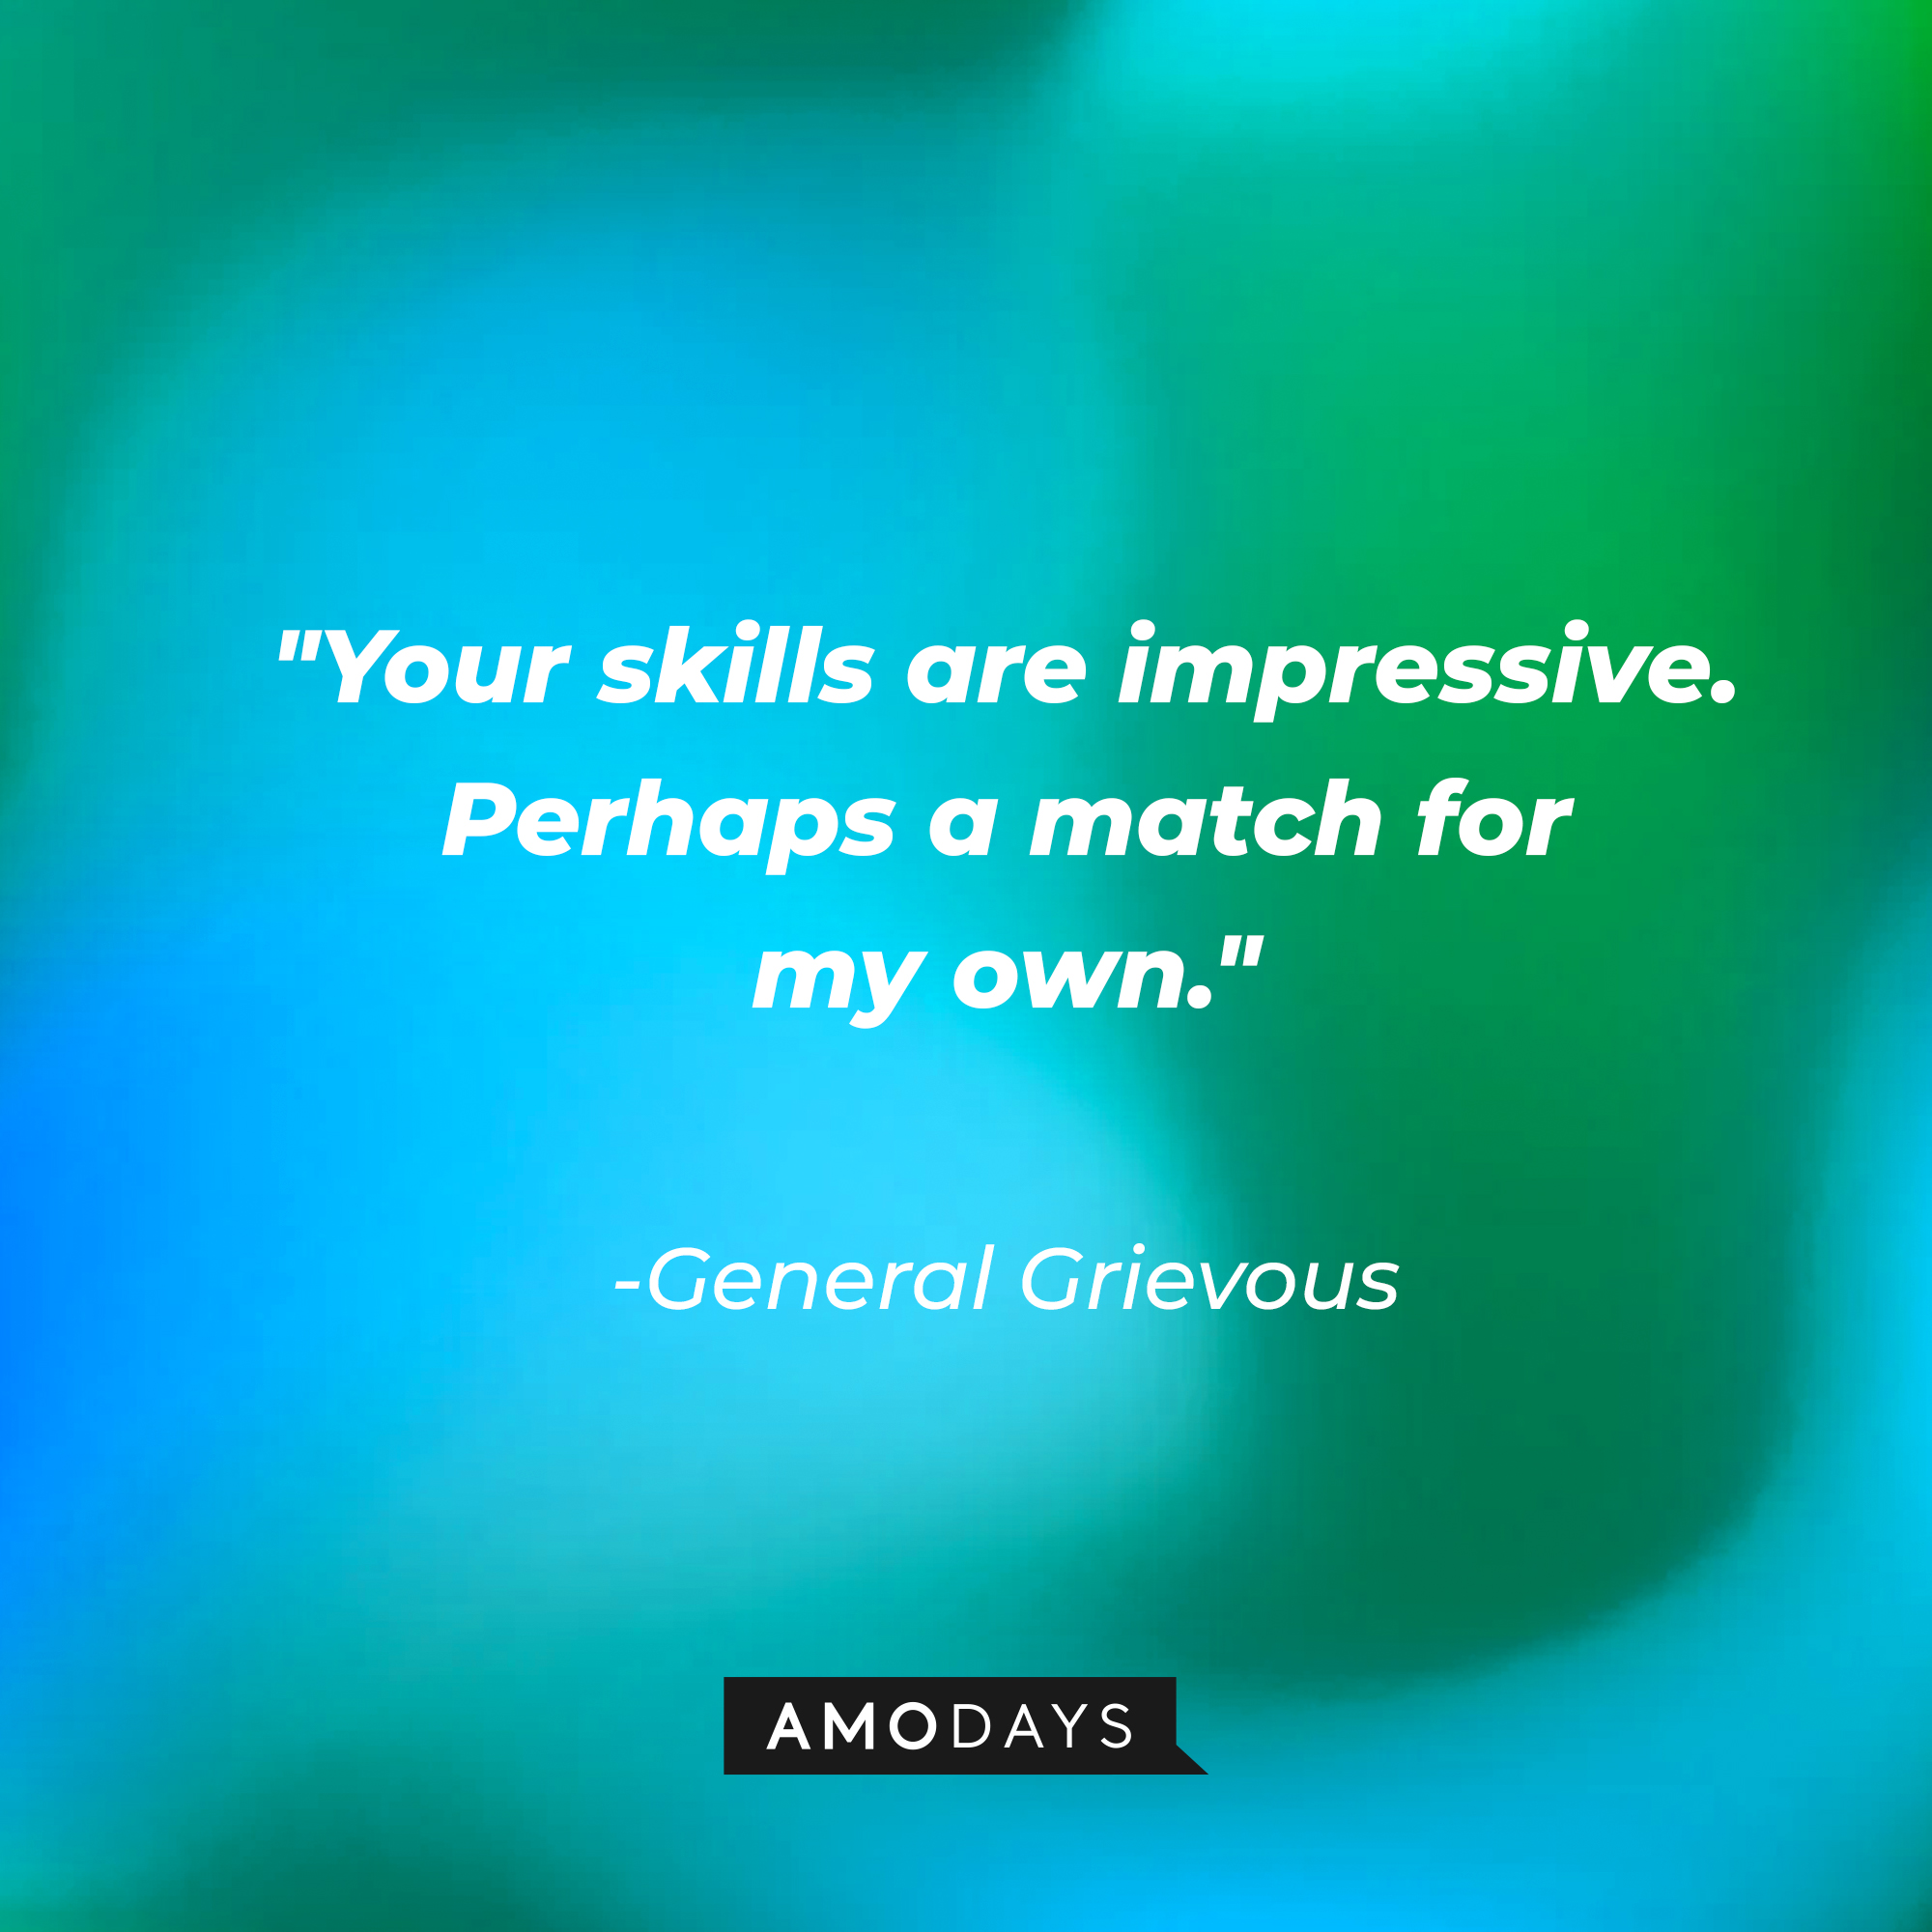 General Grievous' quote: "Your skills are impressive. Perhaps a match for my own." | Source: AmoDays